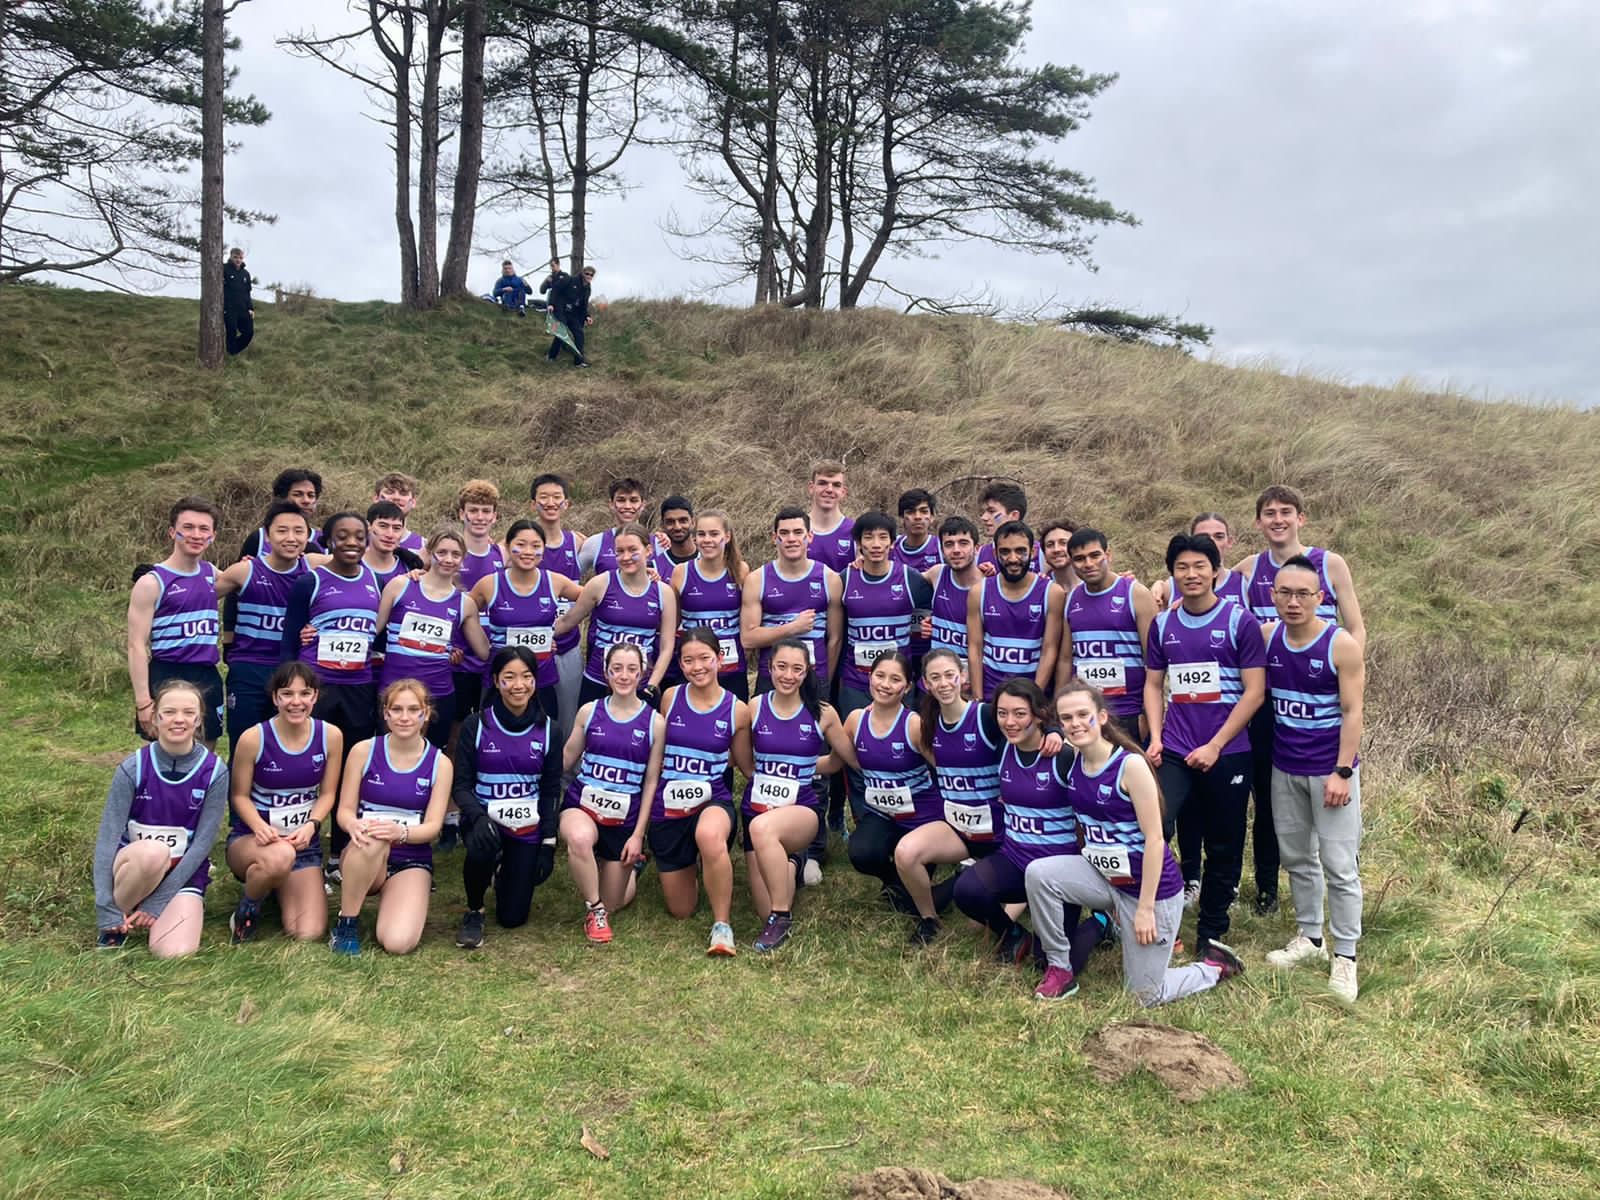 A group photo of the club at the BUCS Cross Country Championships in South Wales